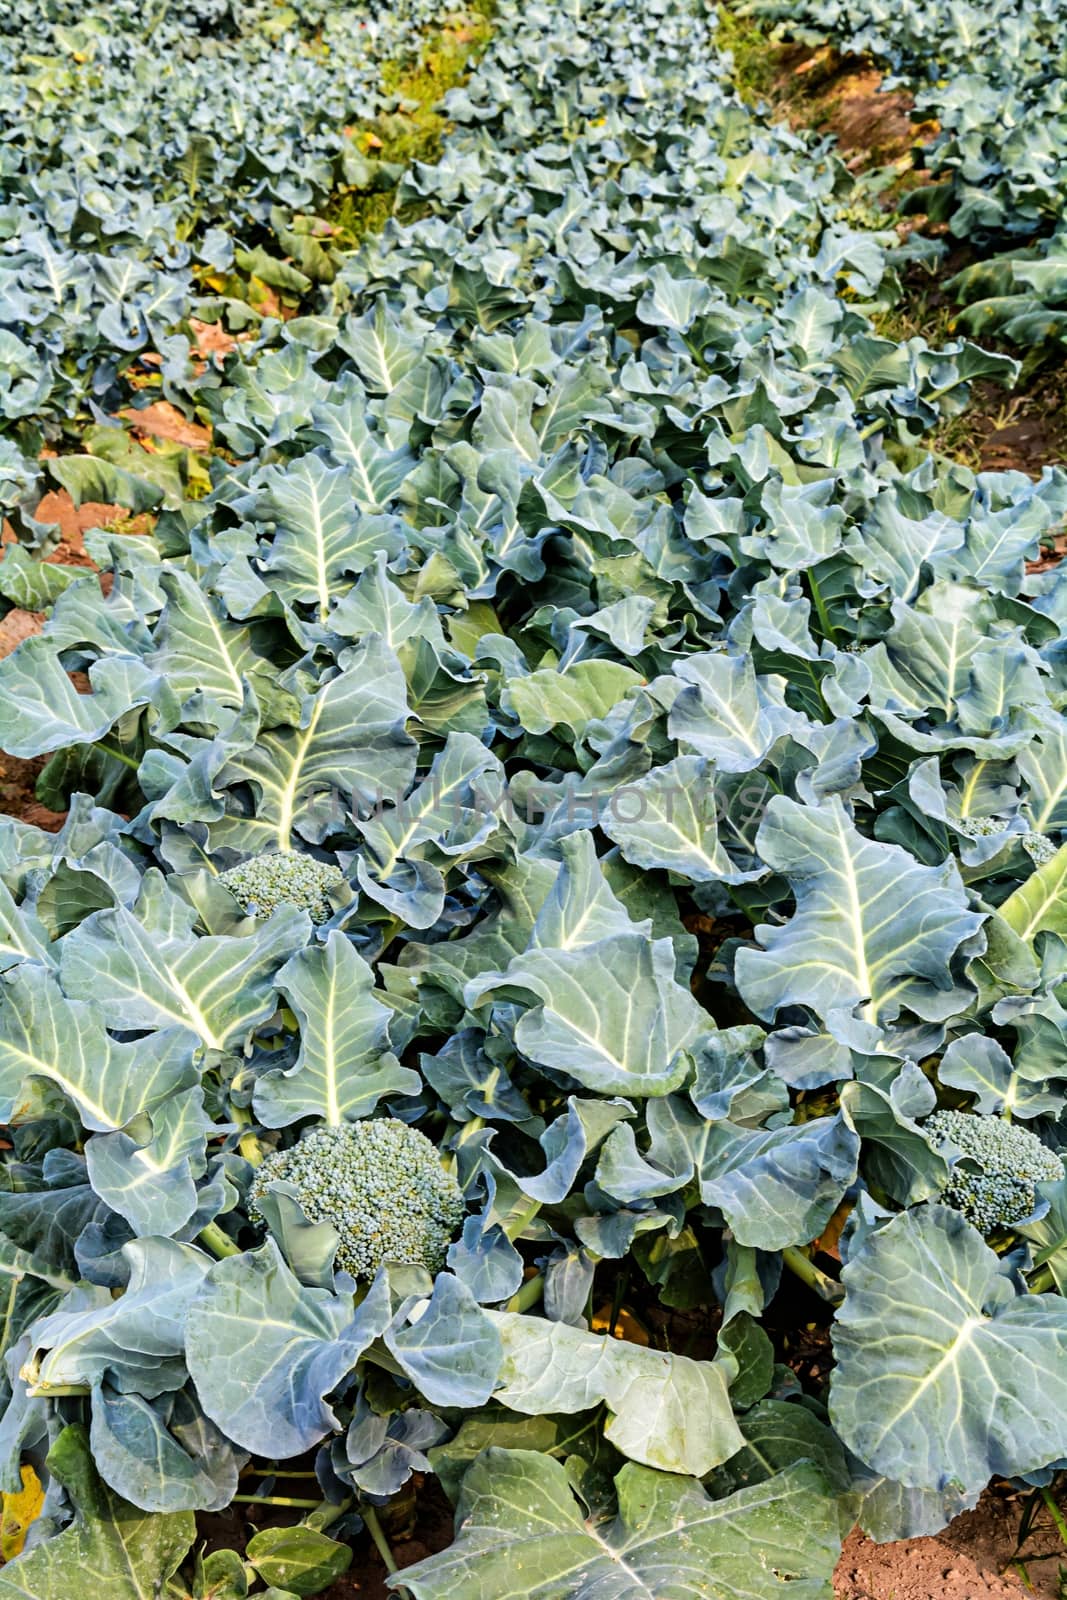 Broccoli growing up in the agricultural garden